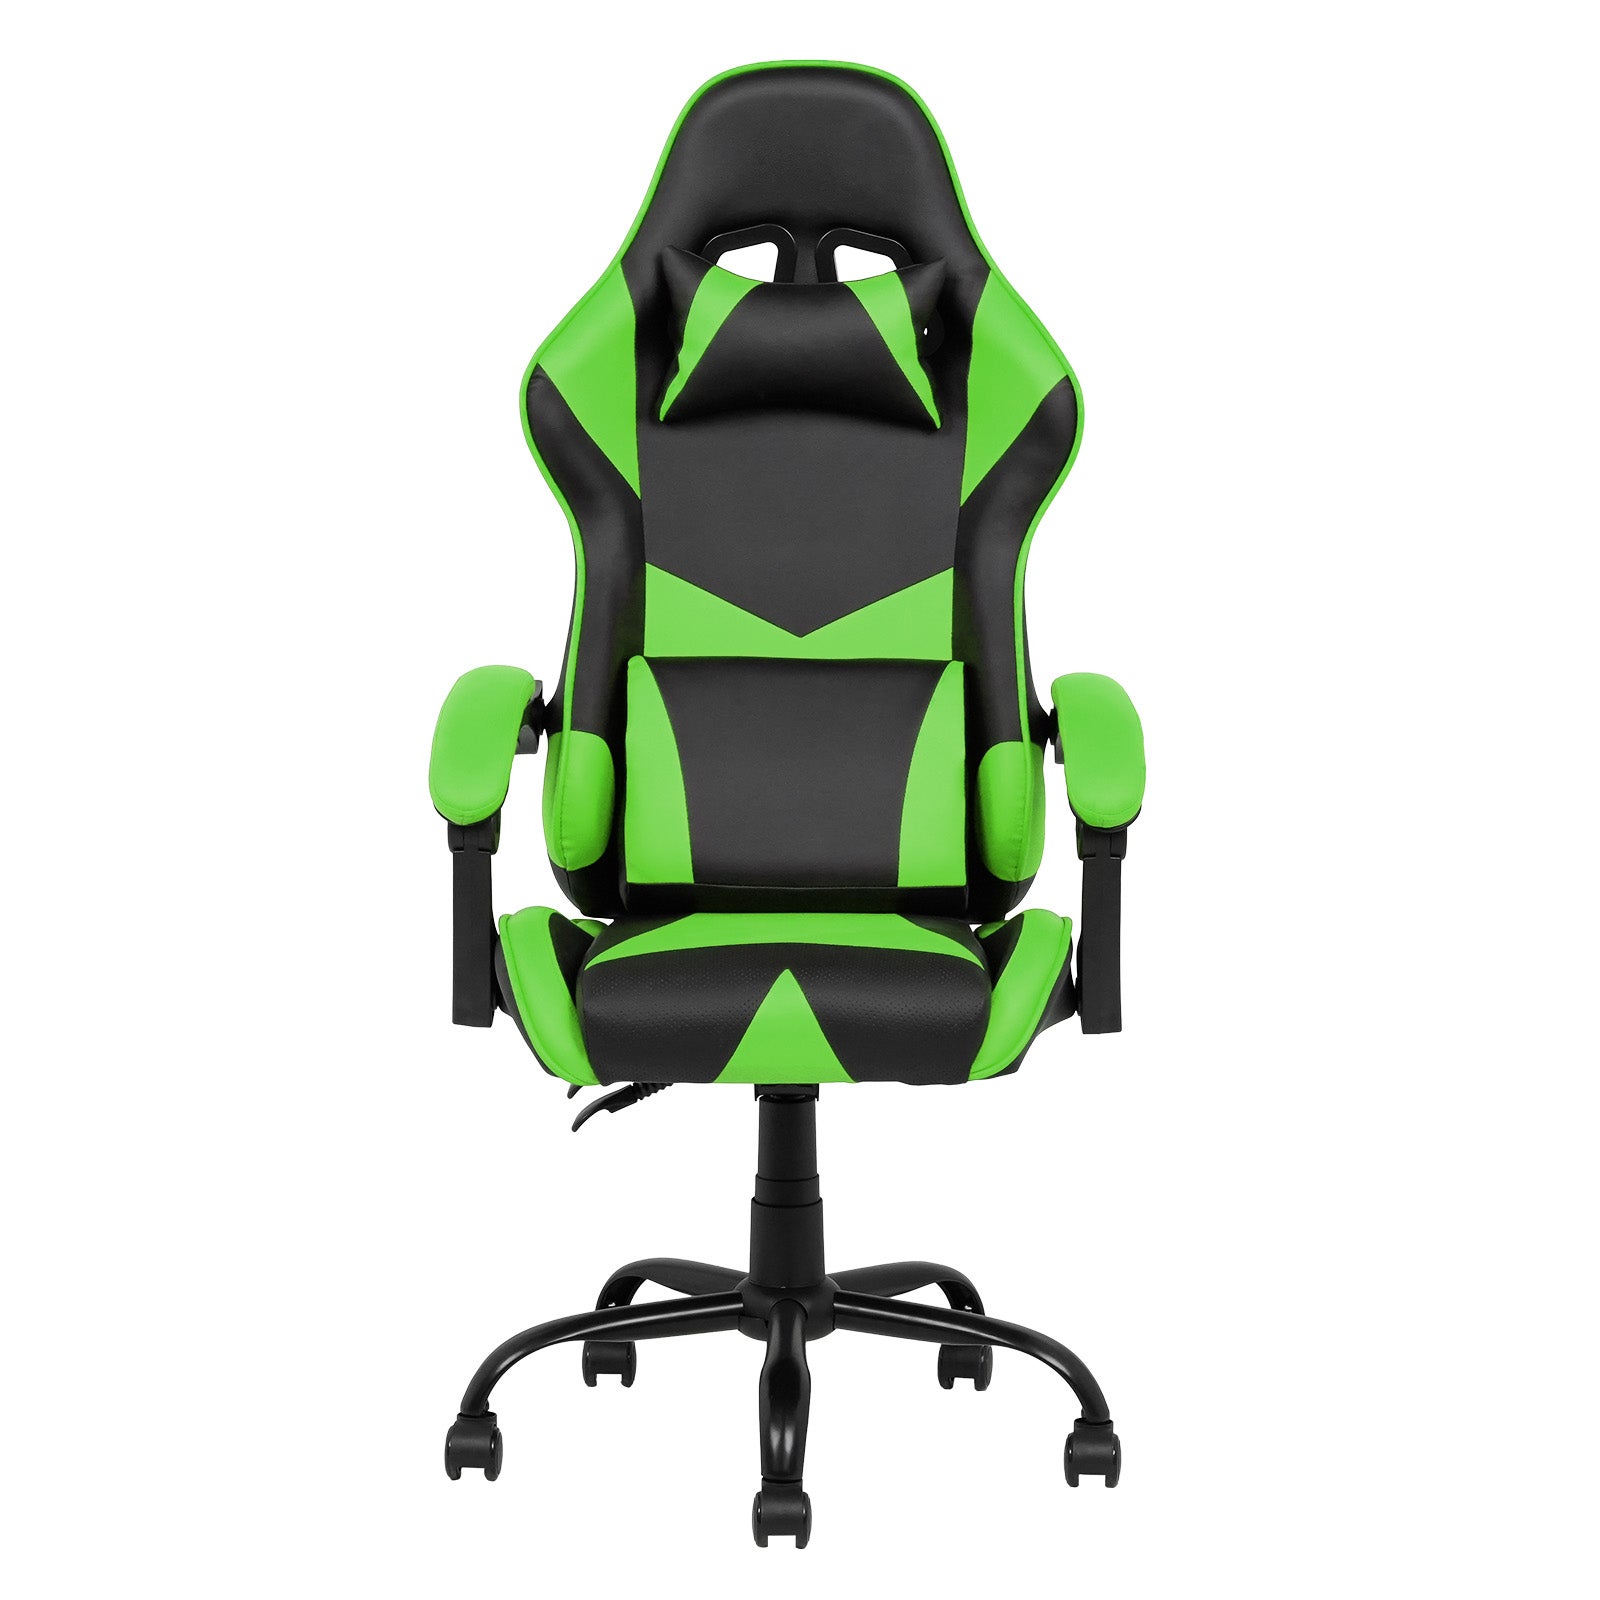 Advwin Gaming Chair Racing Recliner Ergonomic Office Chair Reclining Executive Computer Seat Green